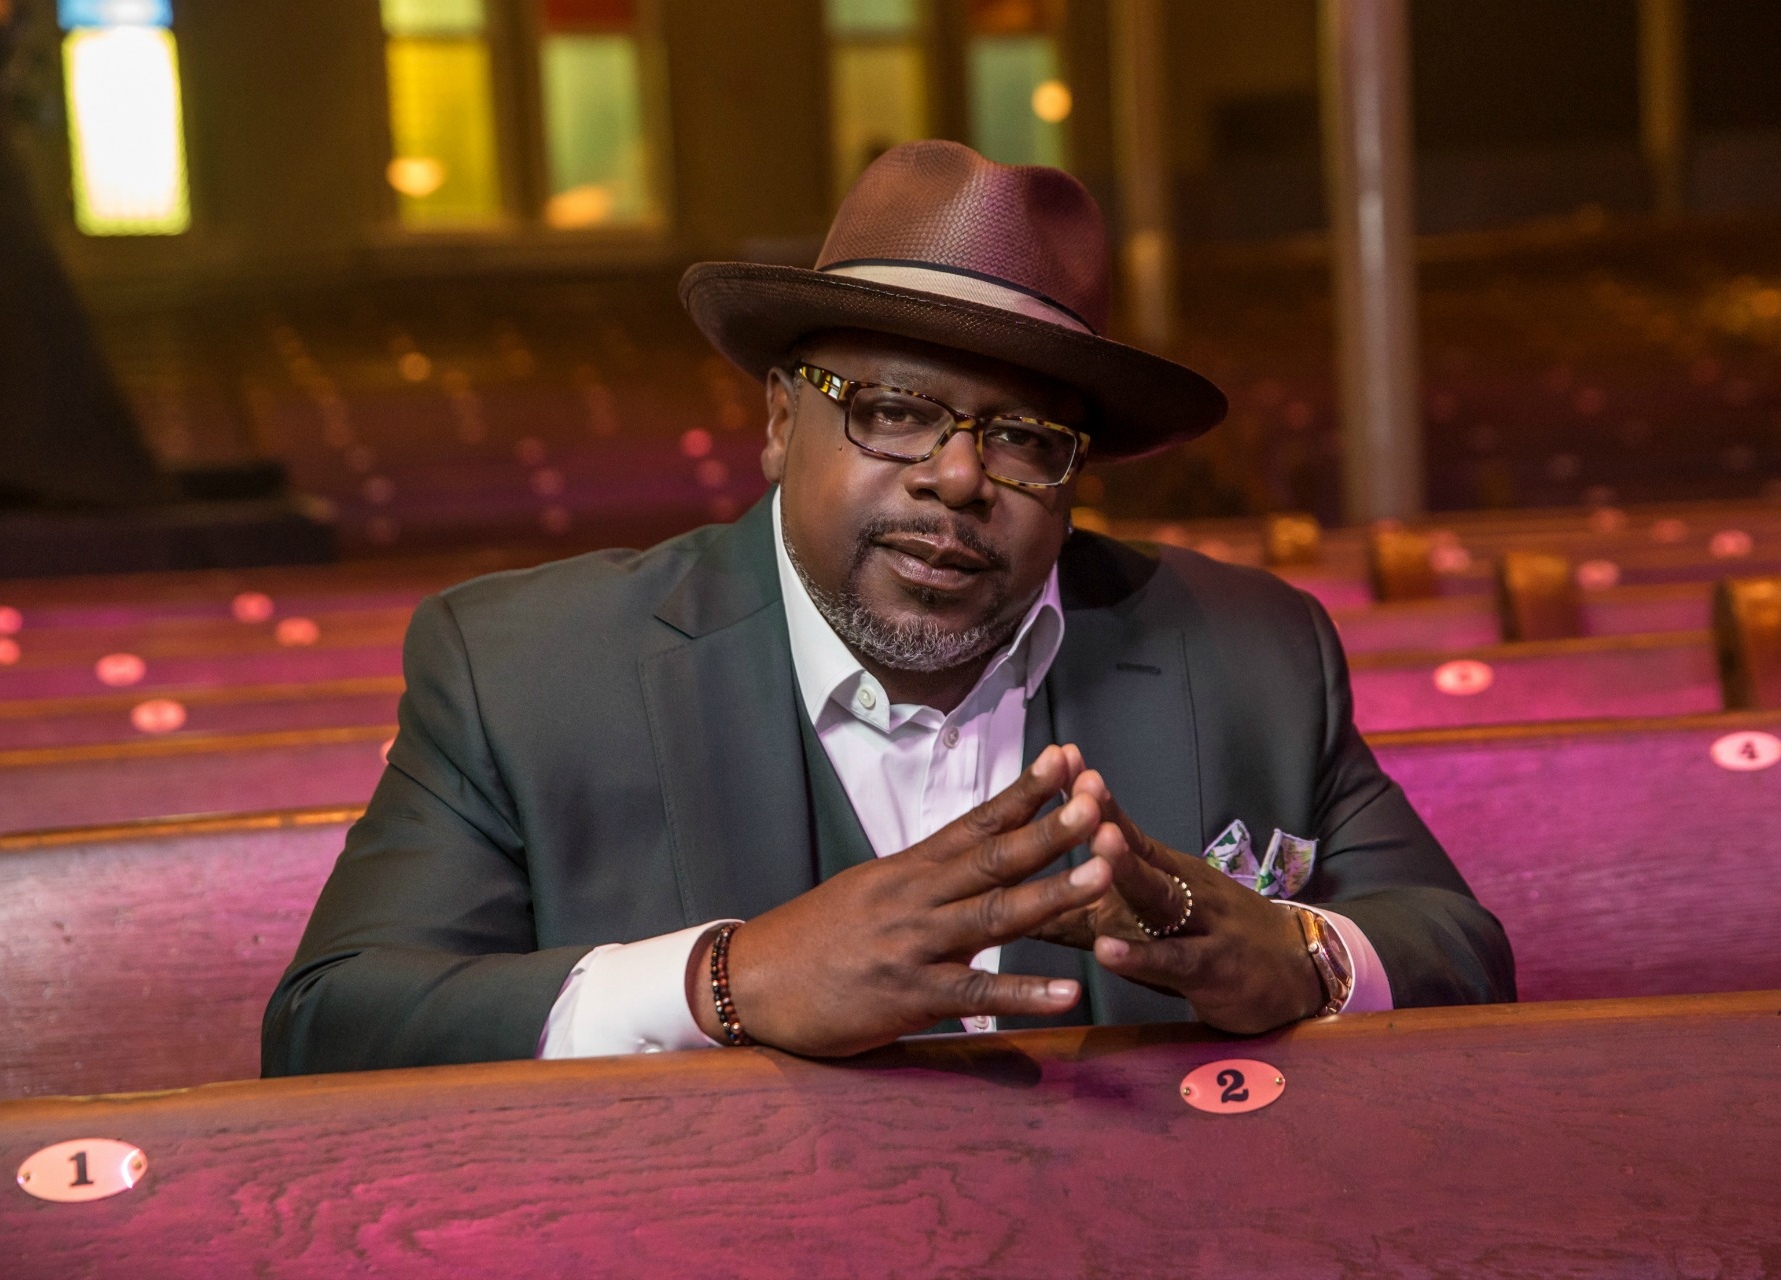 Cedric The Entertainer wearing a gray suit